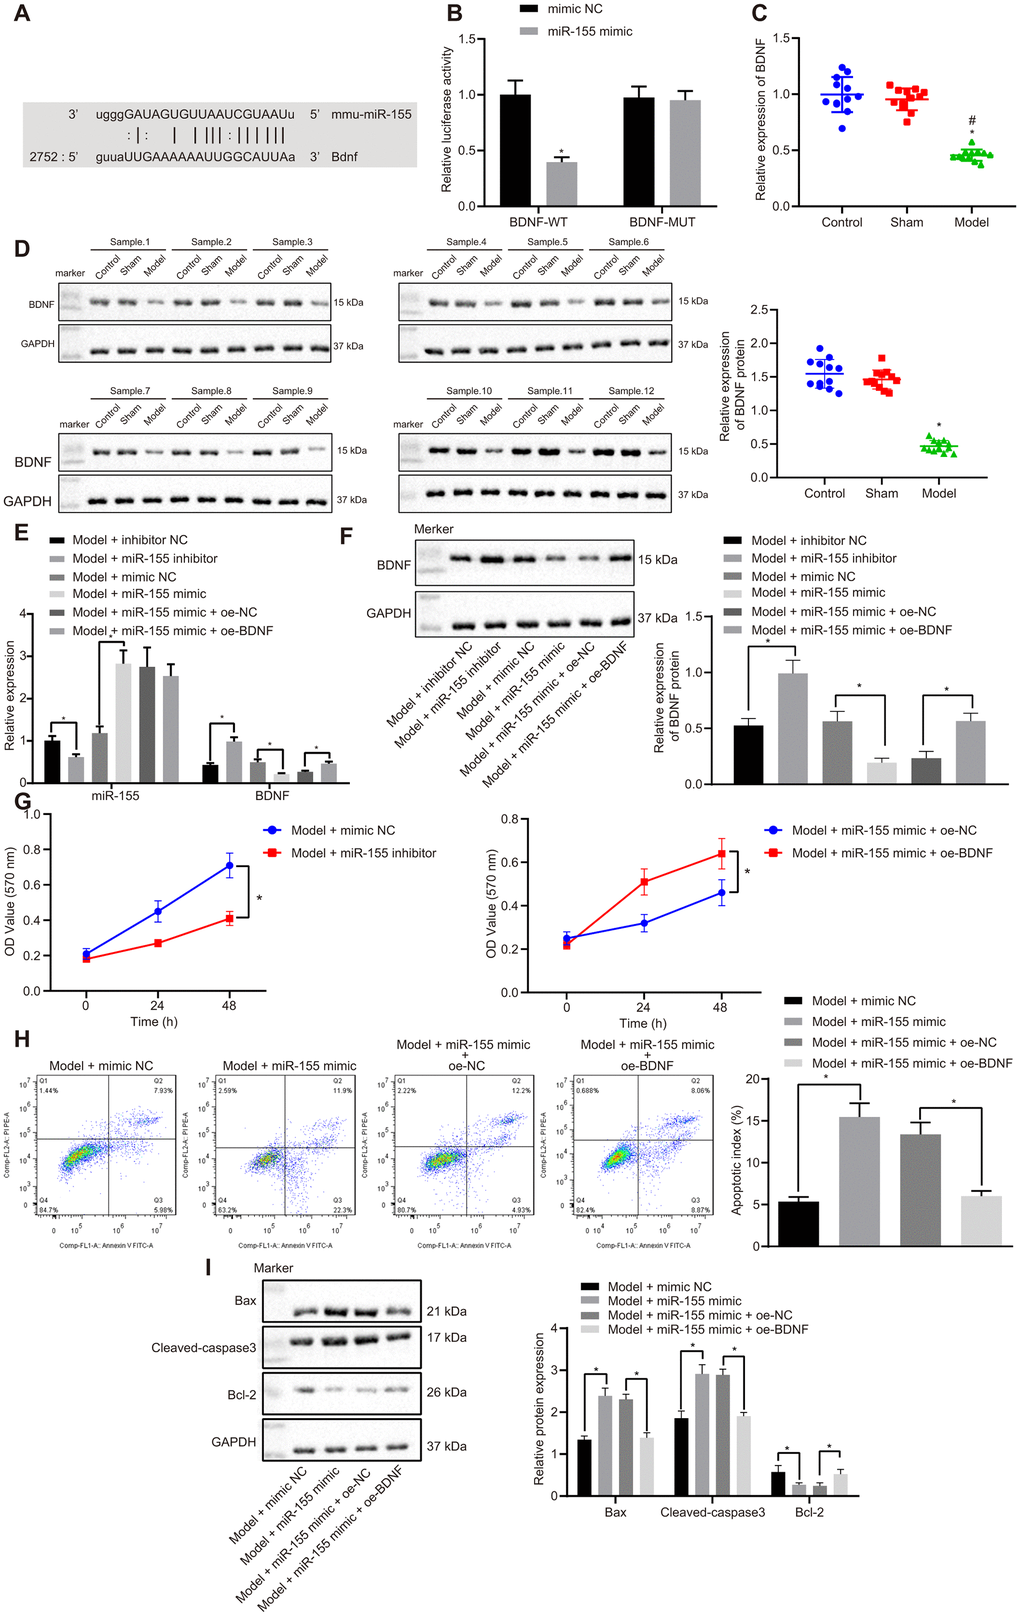 Effects of miR-155 and BDNF on cardiomyocyte apoptosis. (A) Binding relationship between miR-155 and BDNF predicted by online tools; (B) Binding relationship between miR-155 and BDNF determined by dual luciferase reporter gene assay; (C) BDNF mRNA expression in heart tissues; (D) BDNF protein expression in heart tissues; (E) miR-155 and BDNF mRNA expression in cardiomyocytes. (F) BDNF protein expression in cardiomyocytes; (G) Cell viability determined by MTT assay; (H) Cell apoptosis determined by flow cytometry; (I) Protein expression of apoptosis-related factors; *p p 